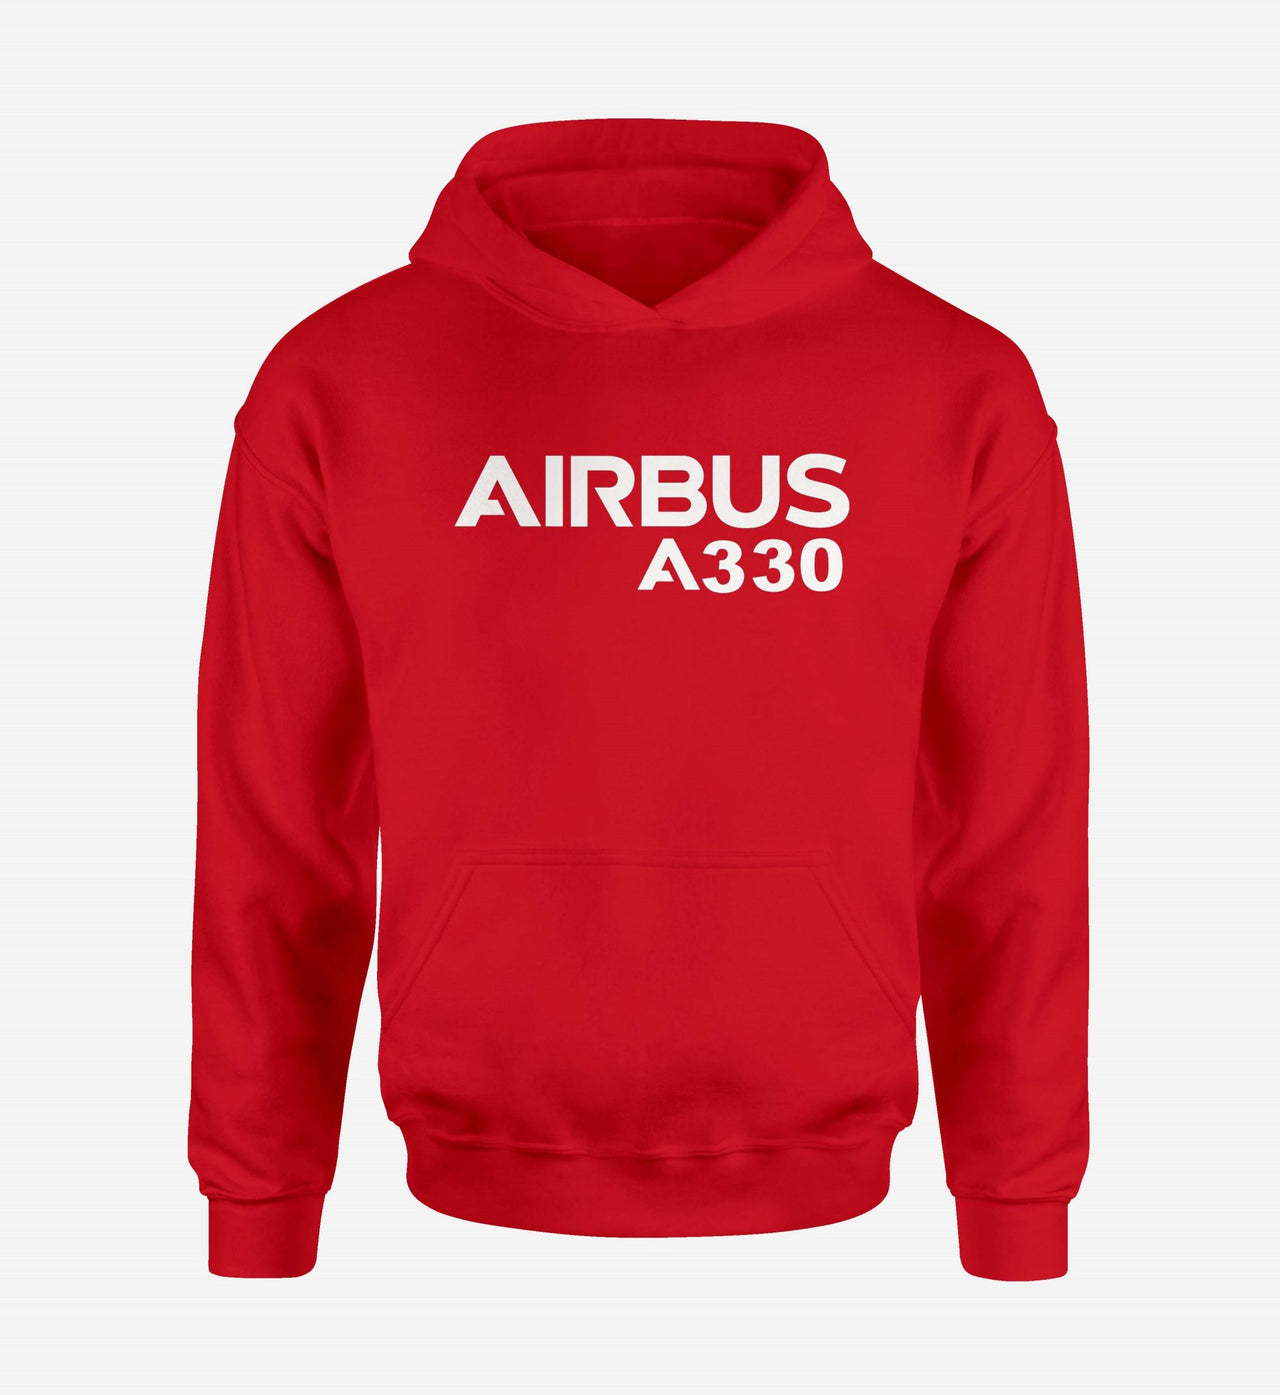 Airbus A330 & Text Designed Hoodies